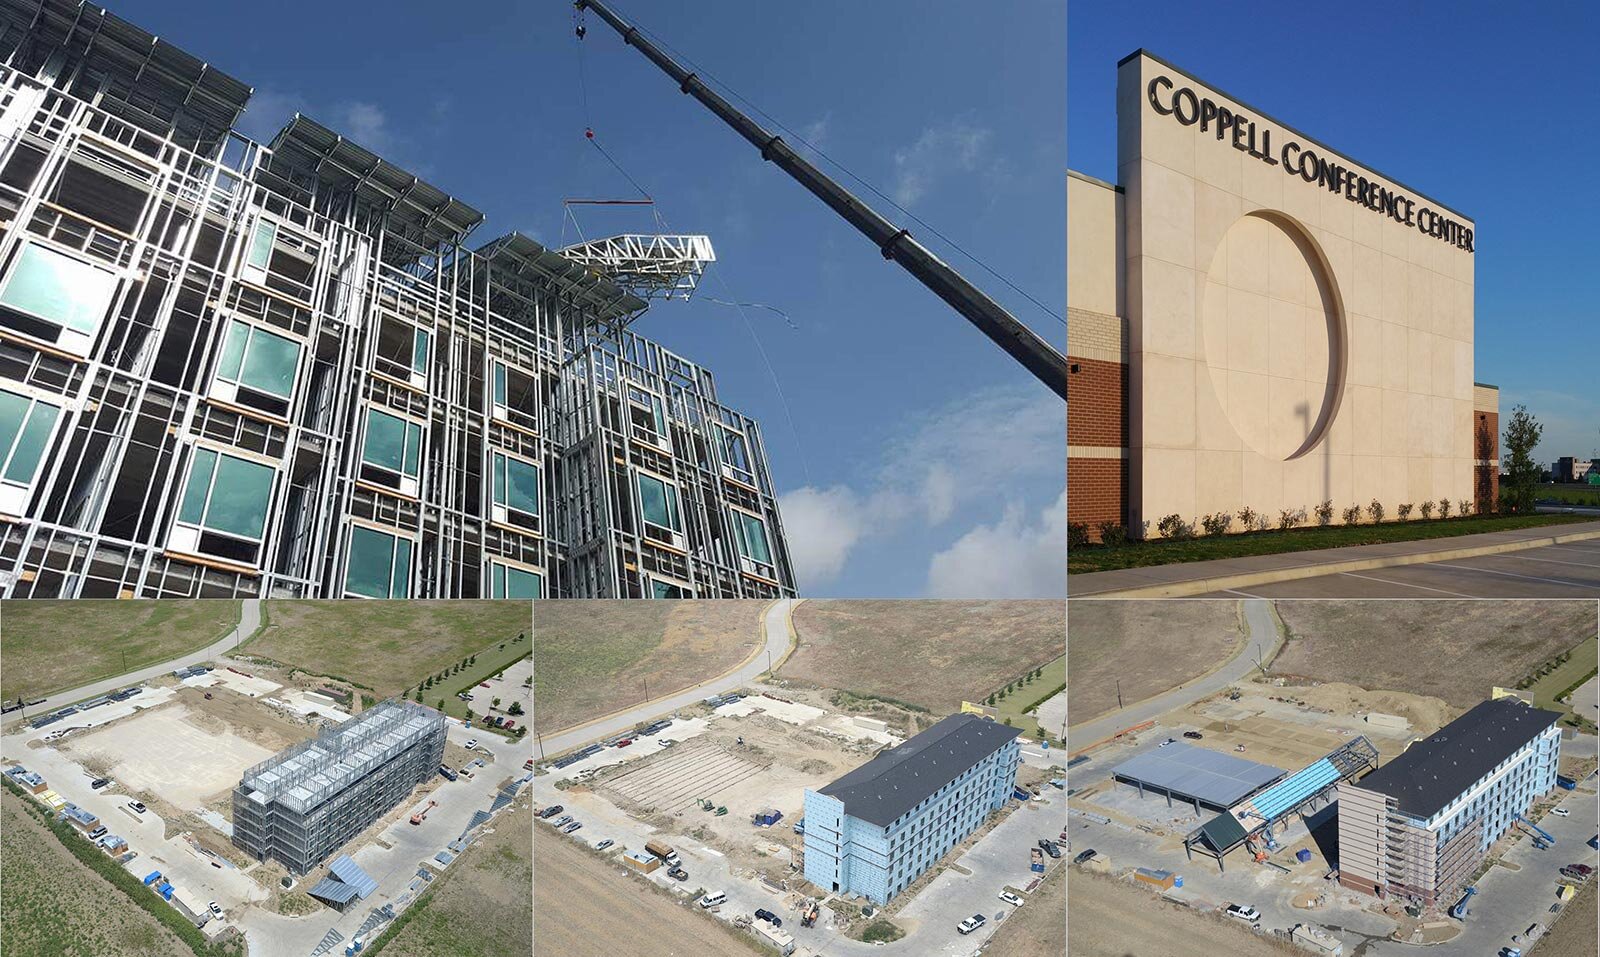 Collage of exterior views during construction